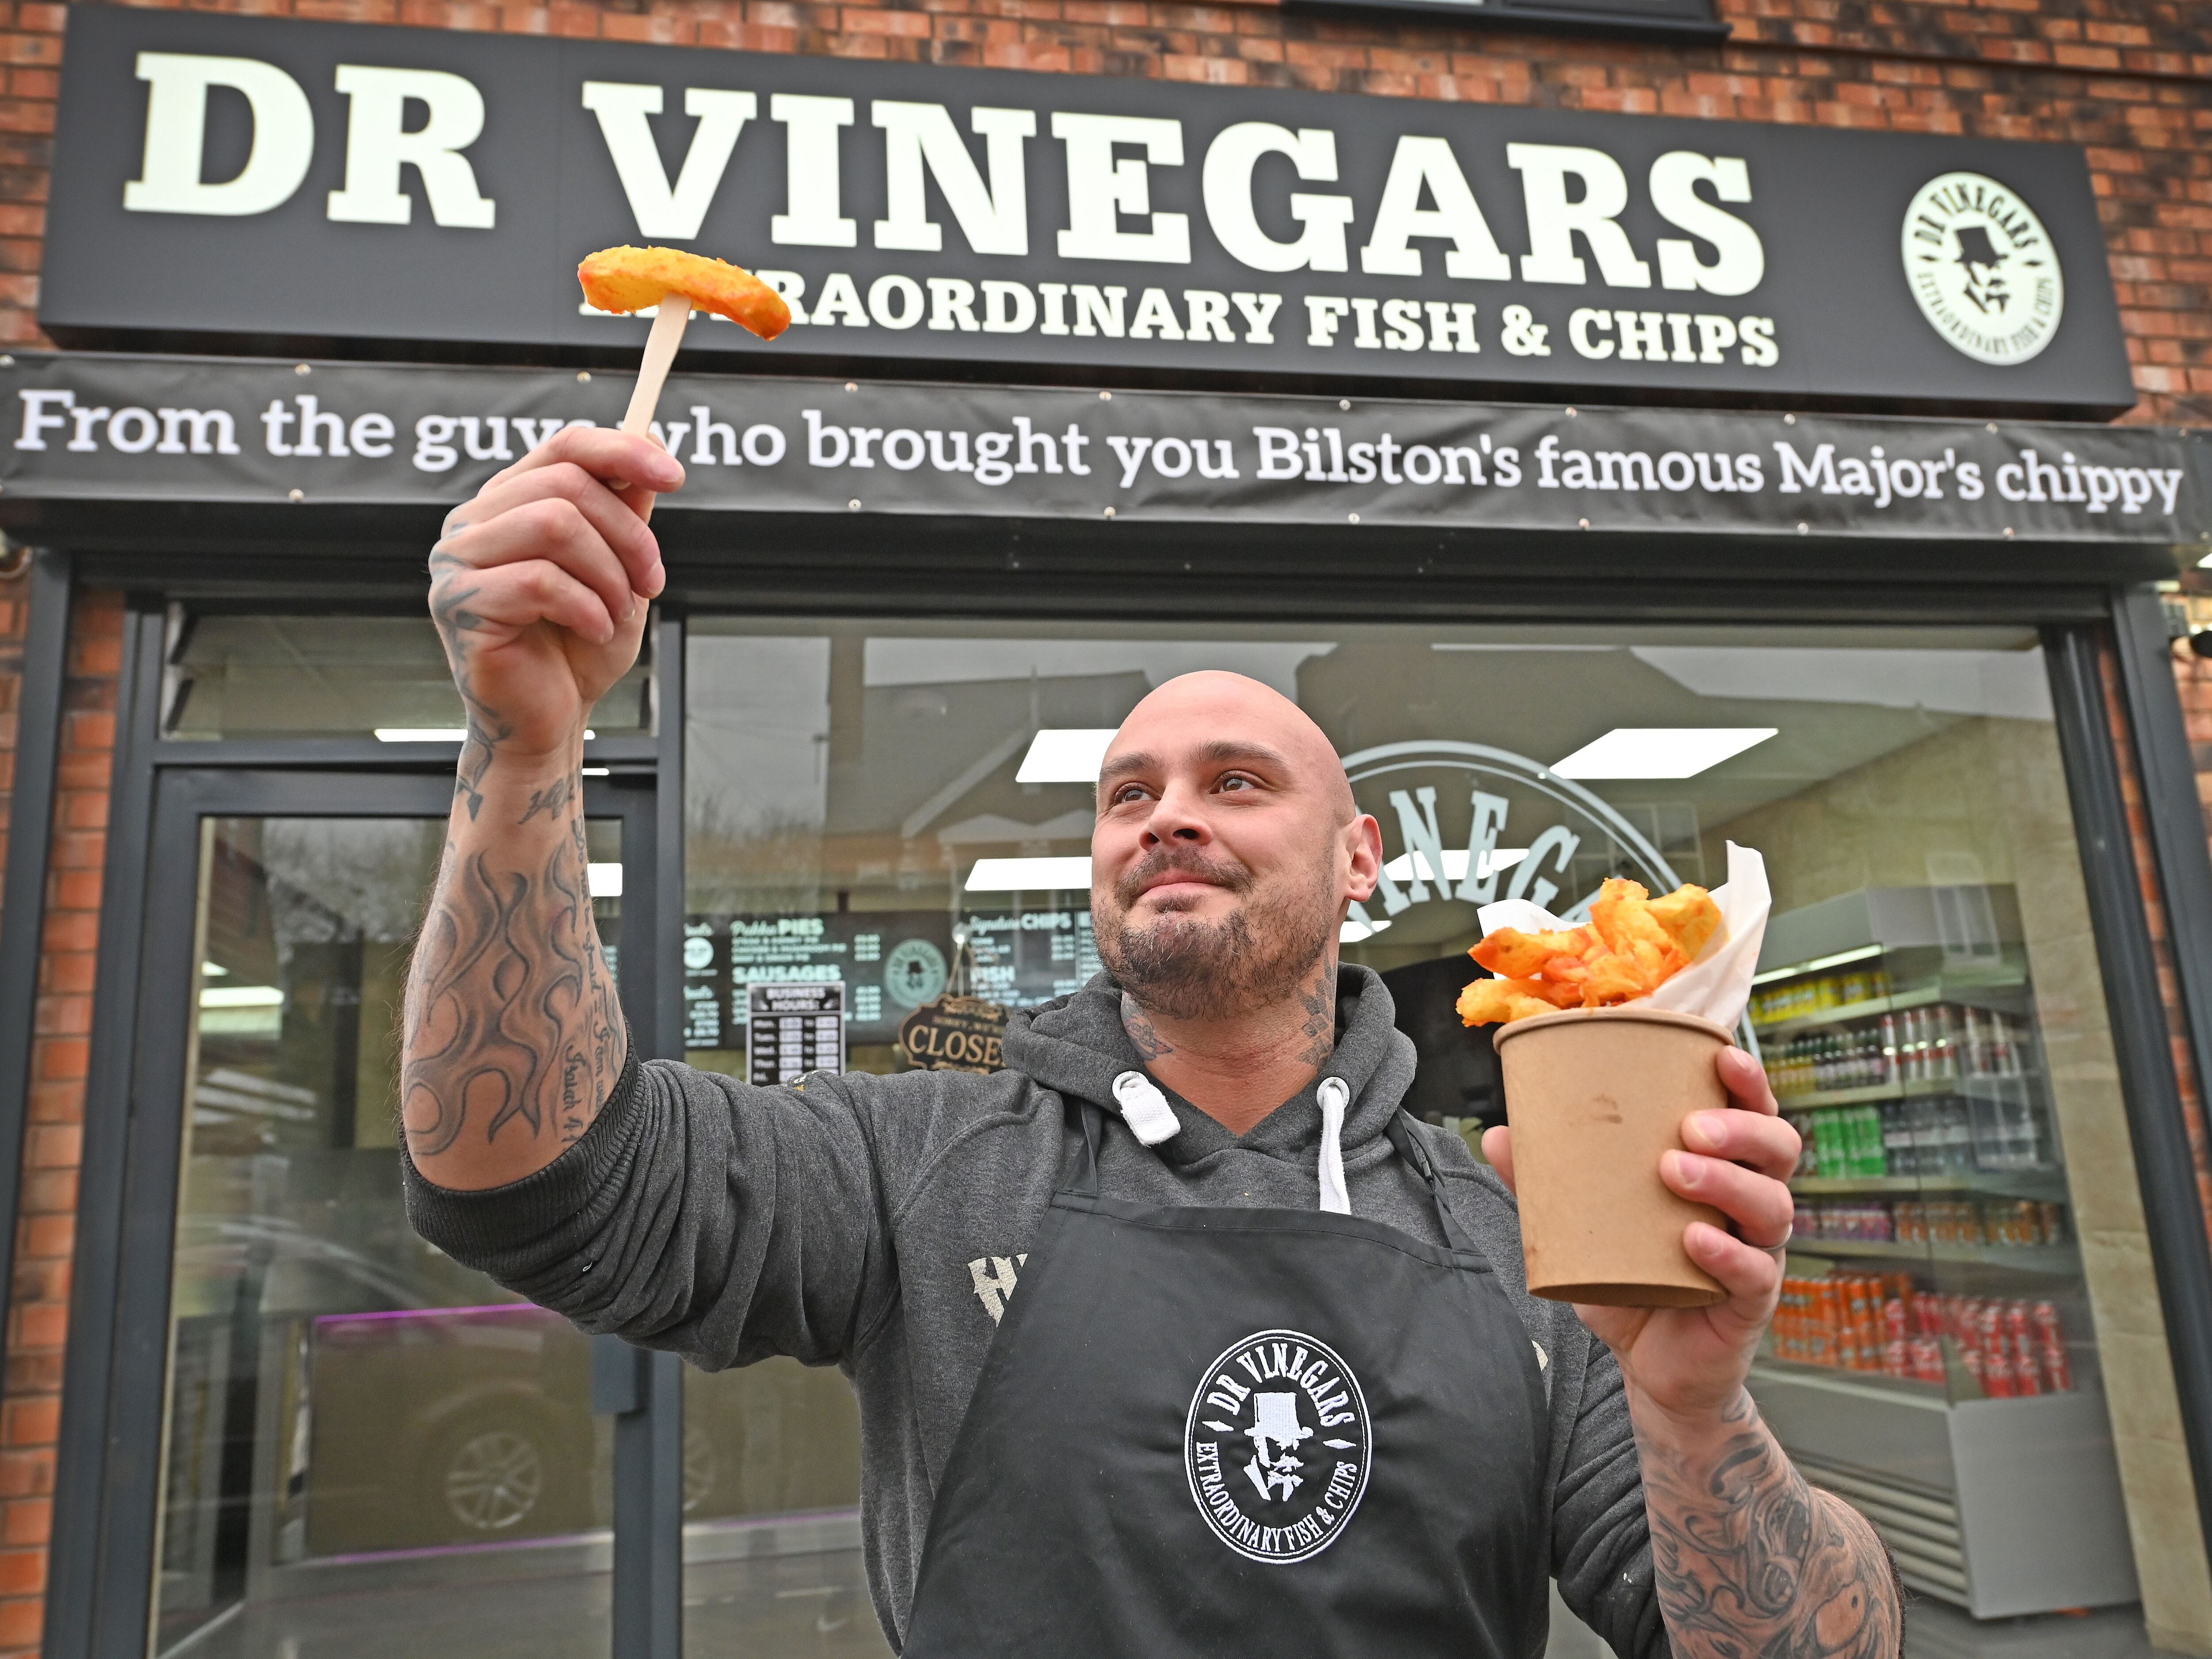 Black Country chippie turning back the clock to 1975 with offer to celebrate family opening Major's